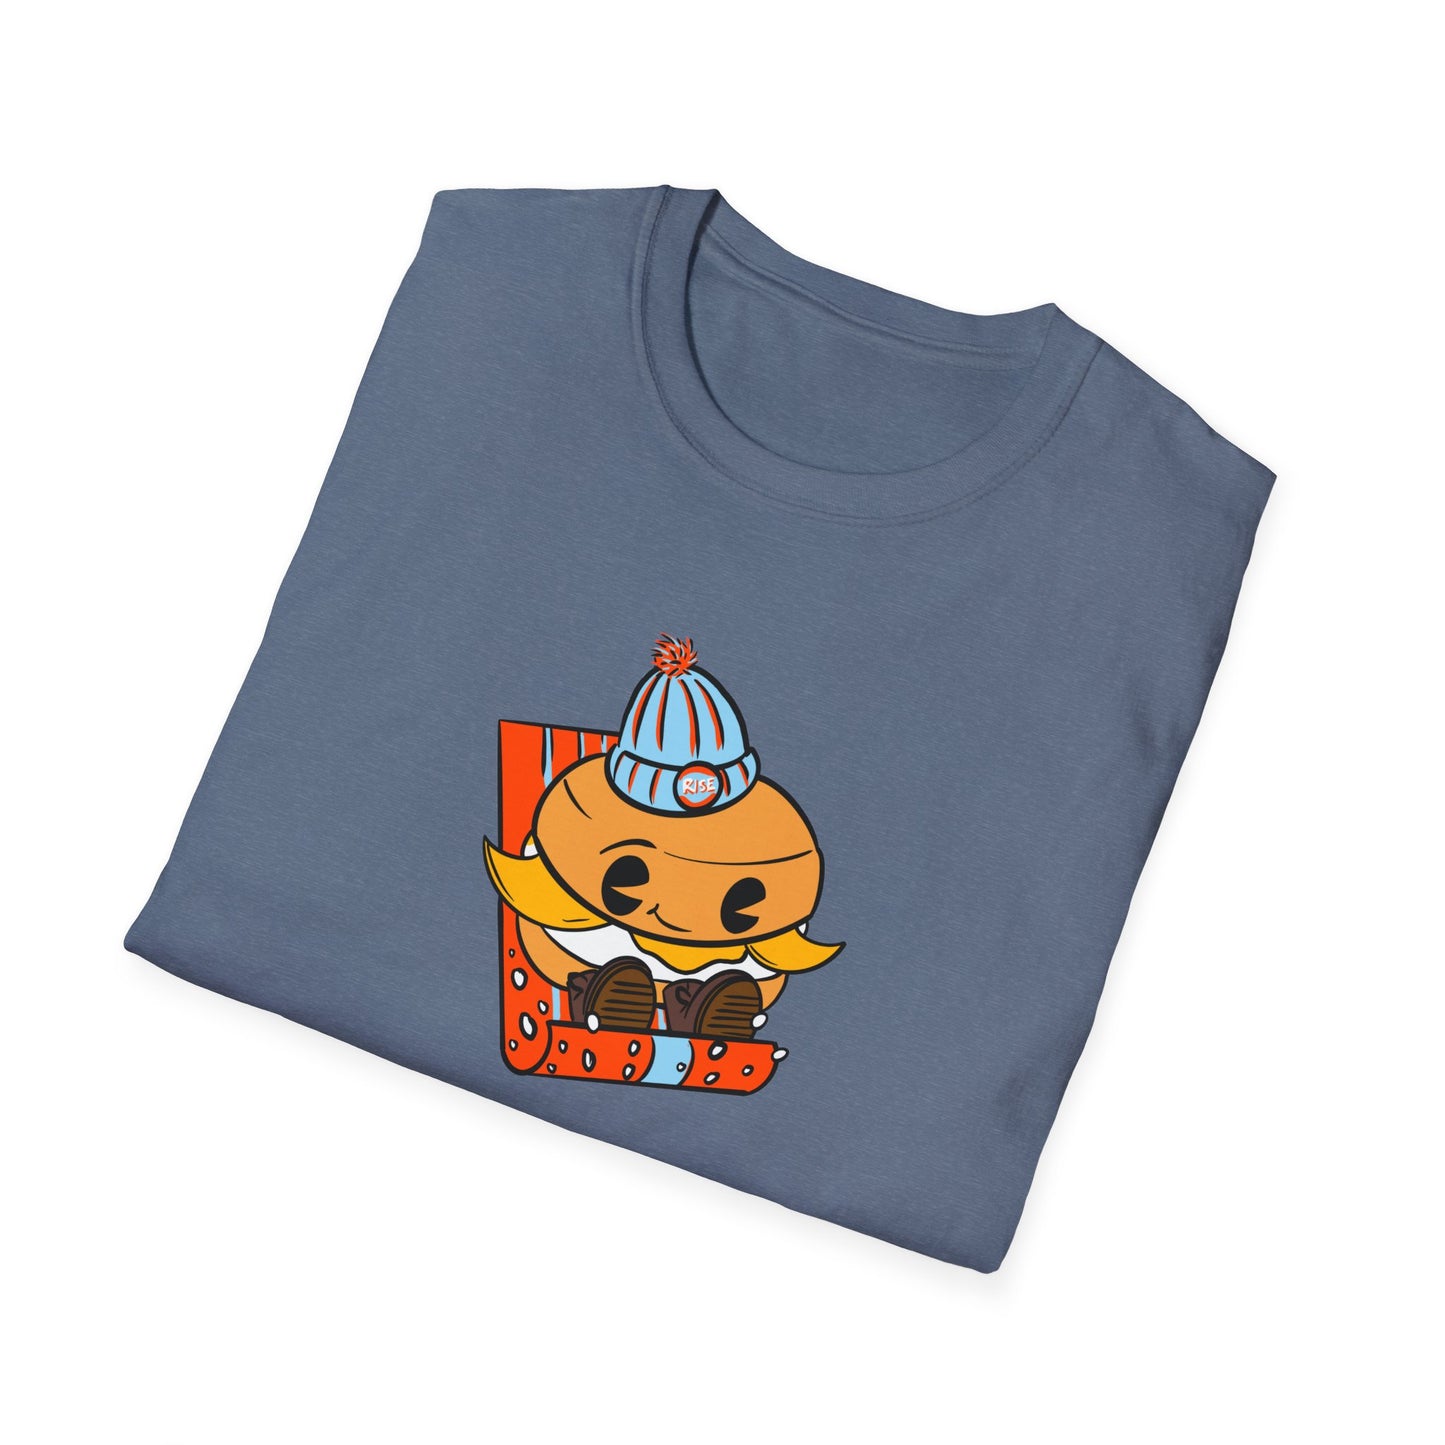 Sledding Biscuit - Unisex Softstyle T-Shirt - Charcoal